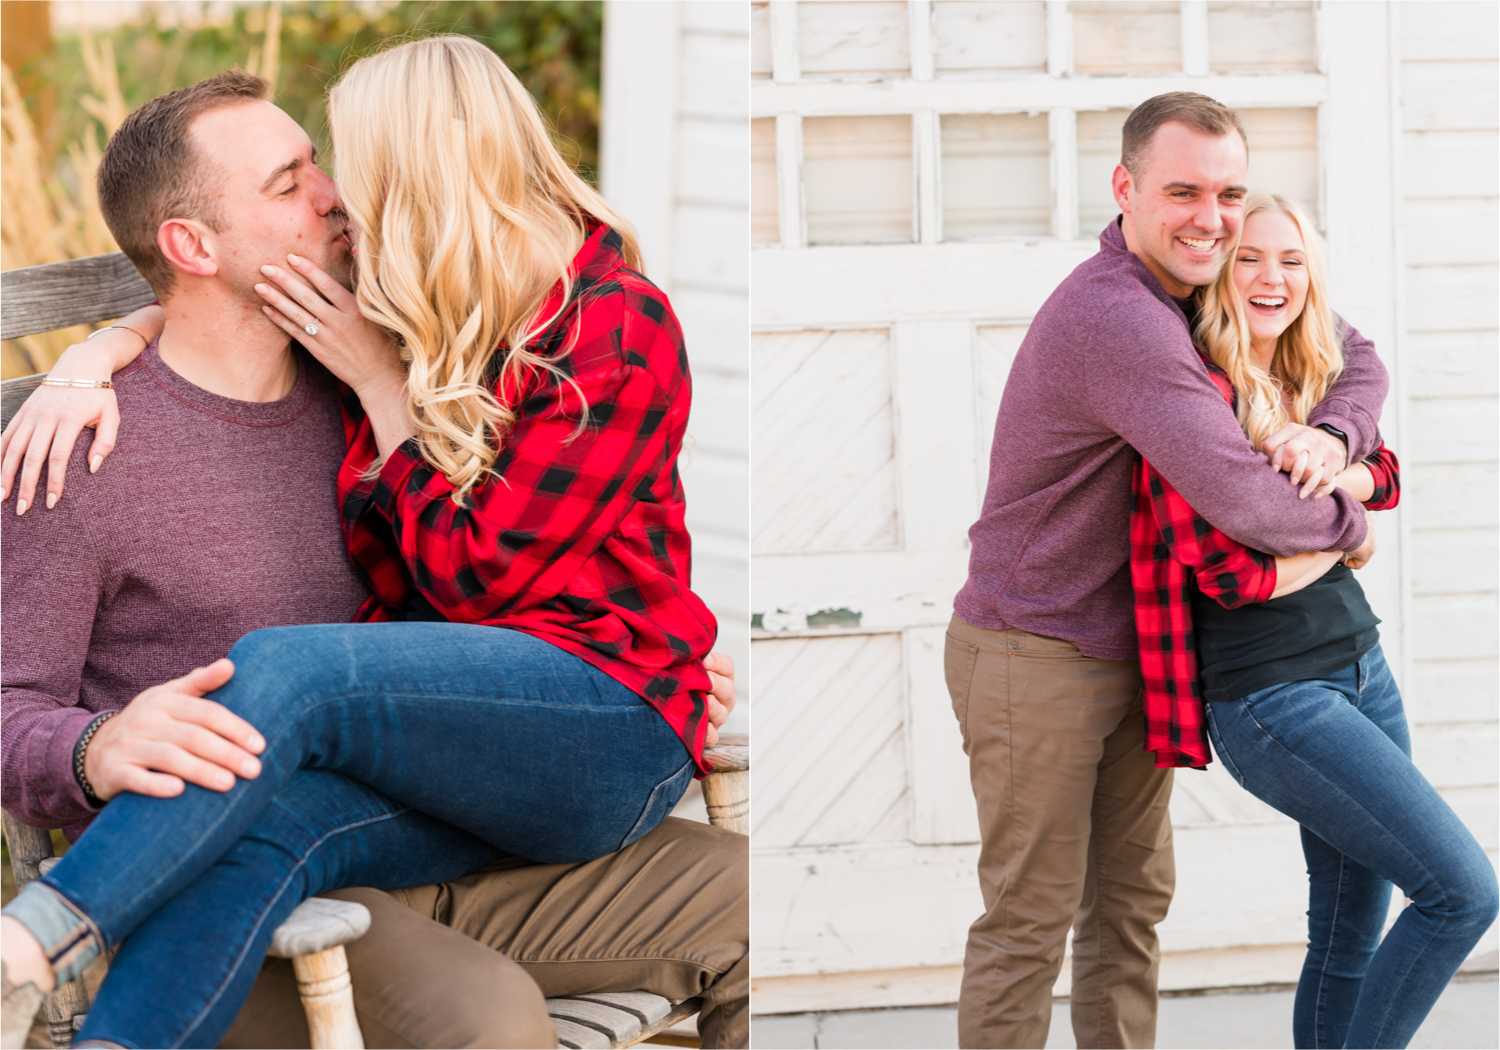 Romantic Fall Farmhouse Engagement at Jessup Farm | Britni Girard Photography | Colorado Wedding Photographer and Videography team | Rustic fences, fall leaves and barn doors in Fort Collins